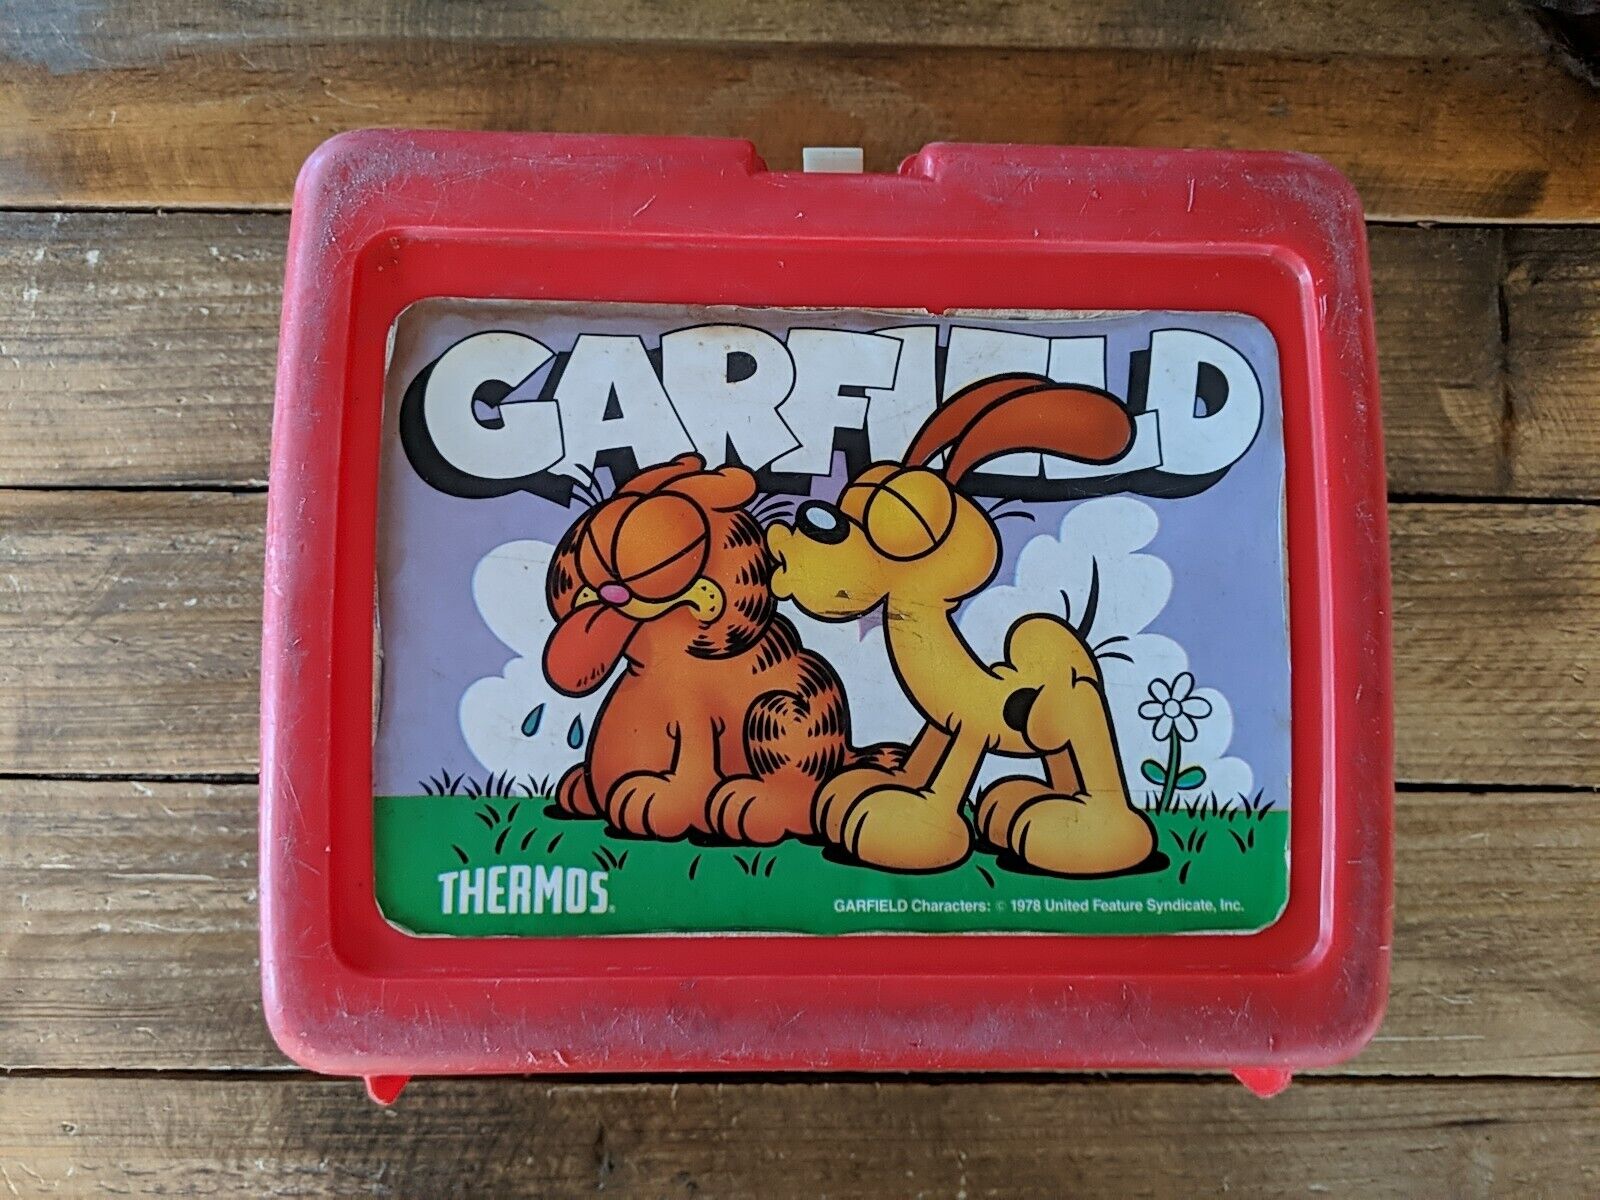 1978 Vintage Garfield Odie Red Plastic Lunch Box White Thermos Cup USA Jim Davis